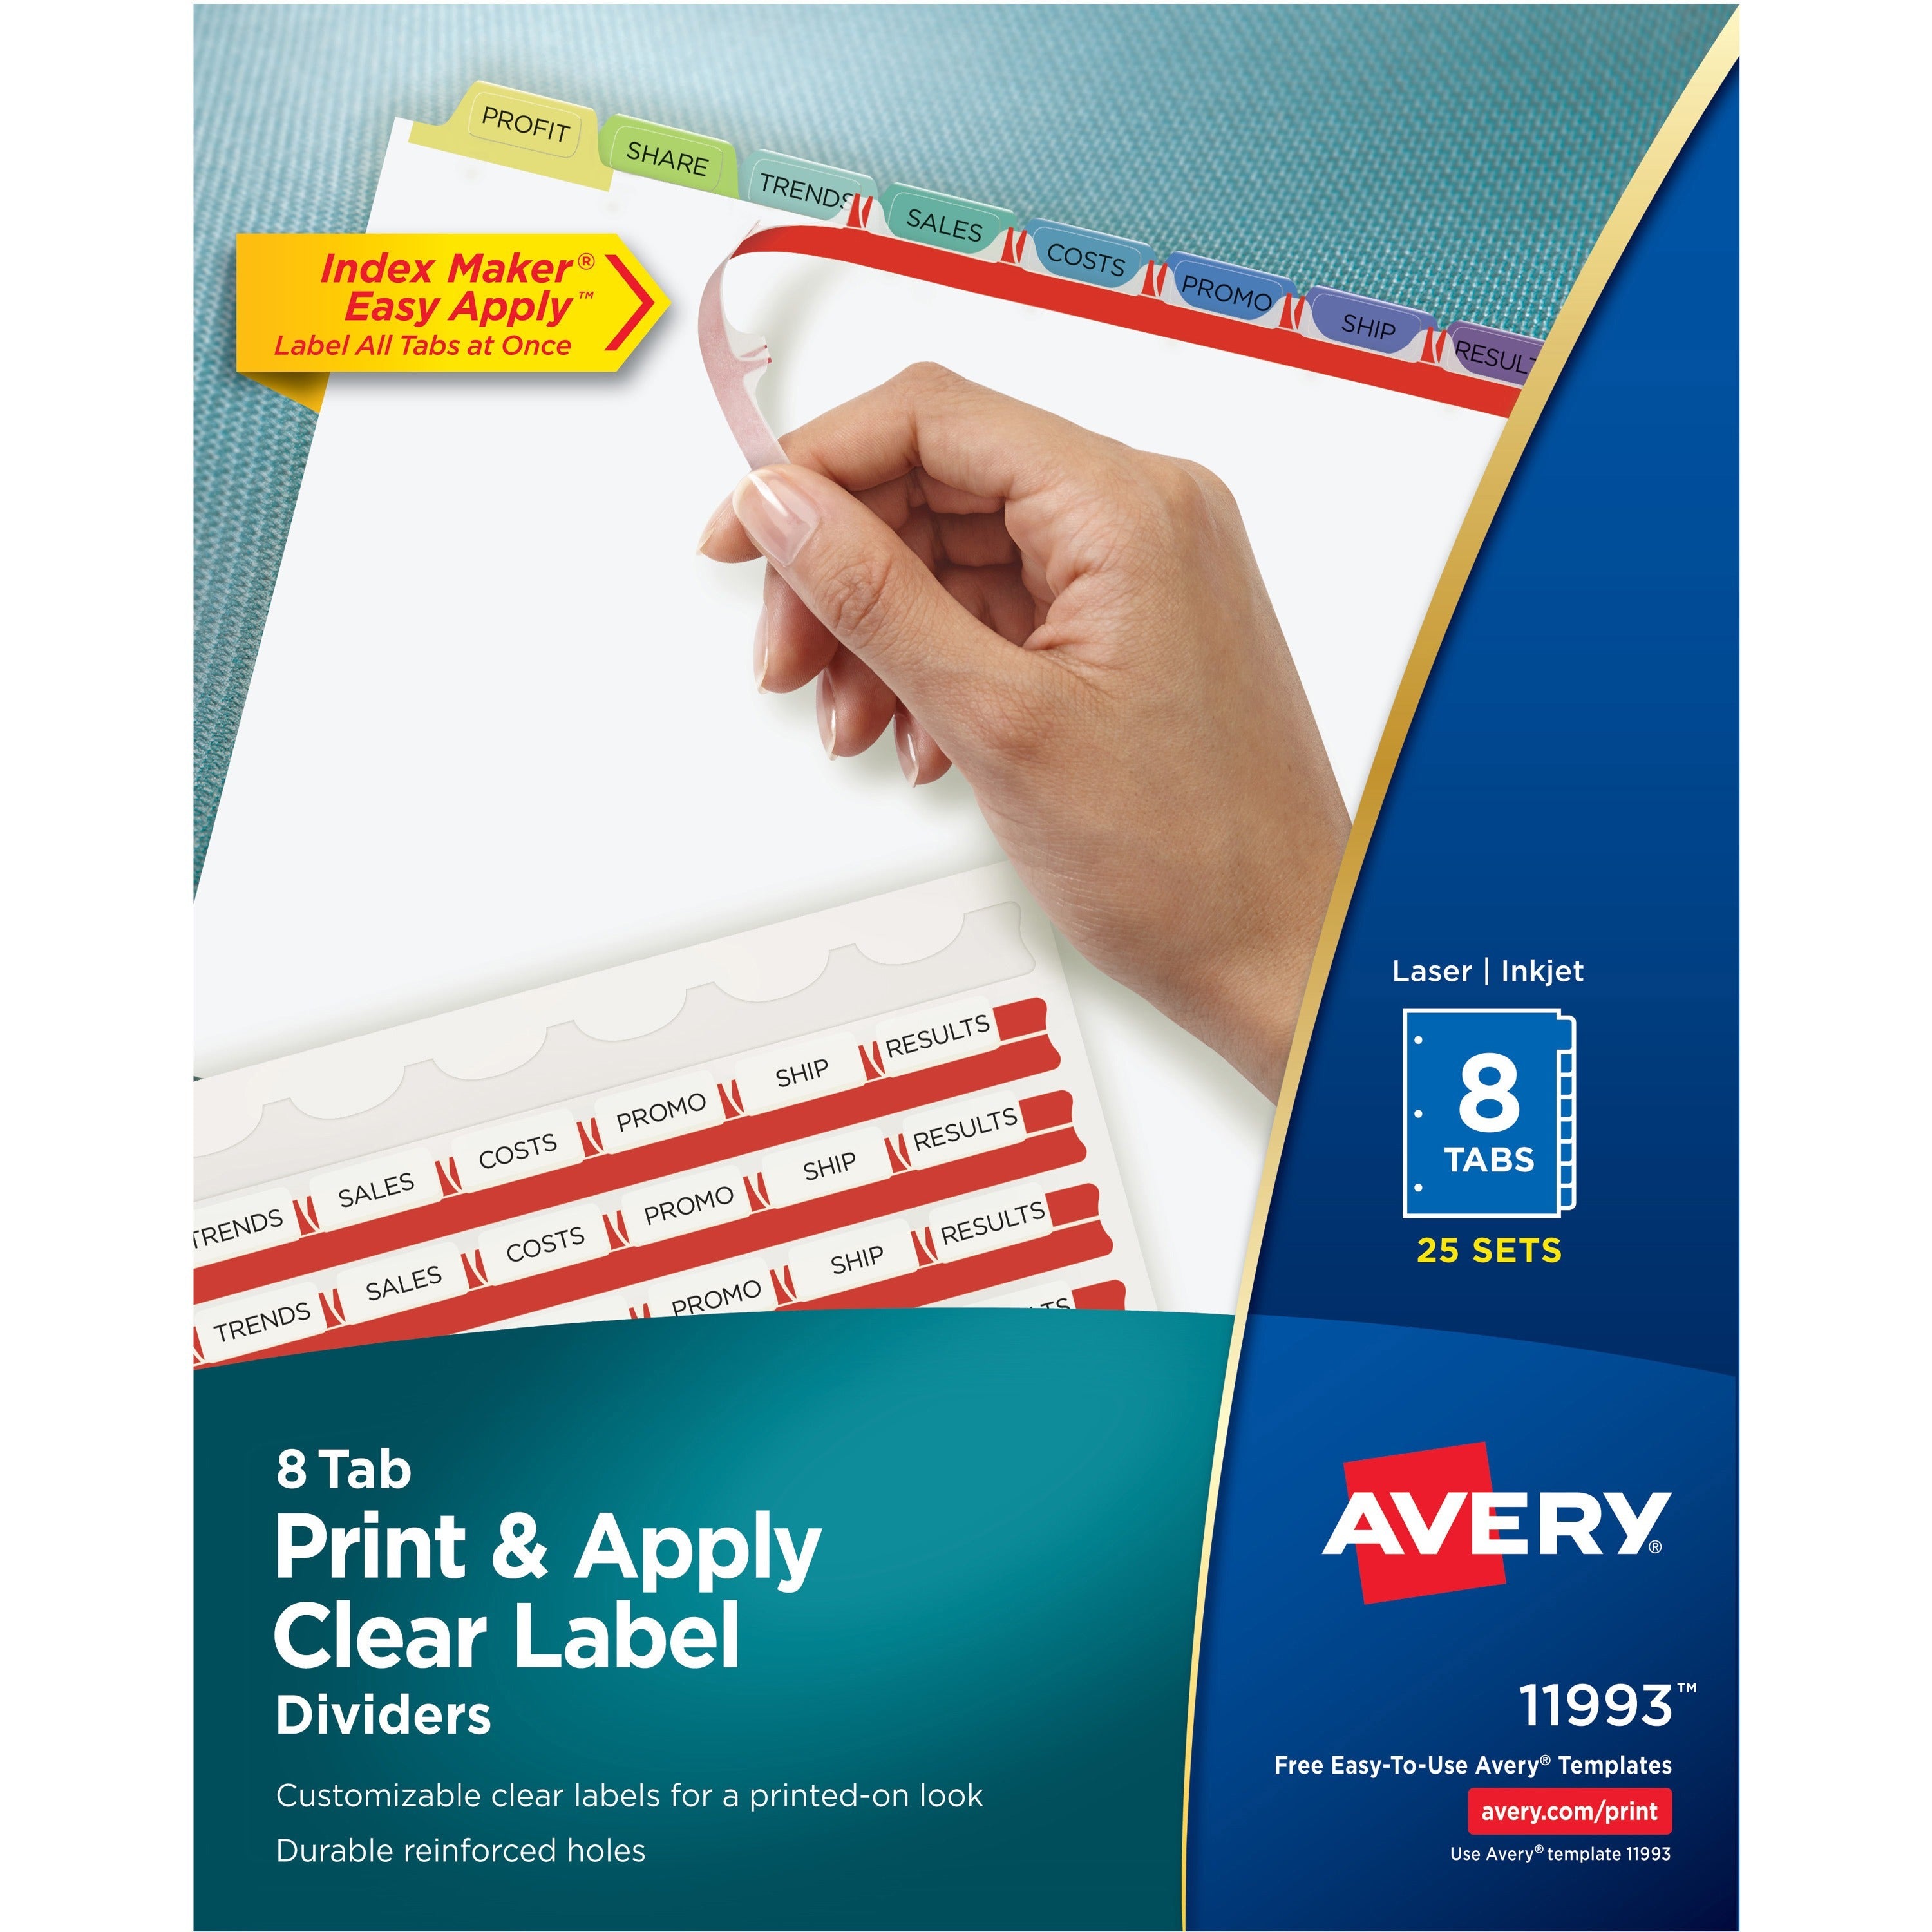 Print and Apply Index Maker Clear Label Dividers, 8-Tab, Color Tabs, 11 x 8.5, White, Contemporary Color Tabs, 25 Sets - 1